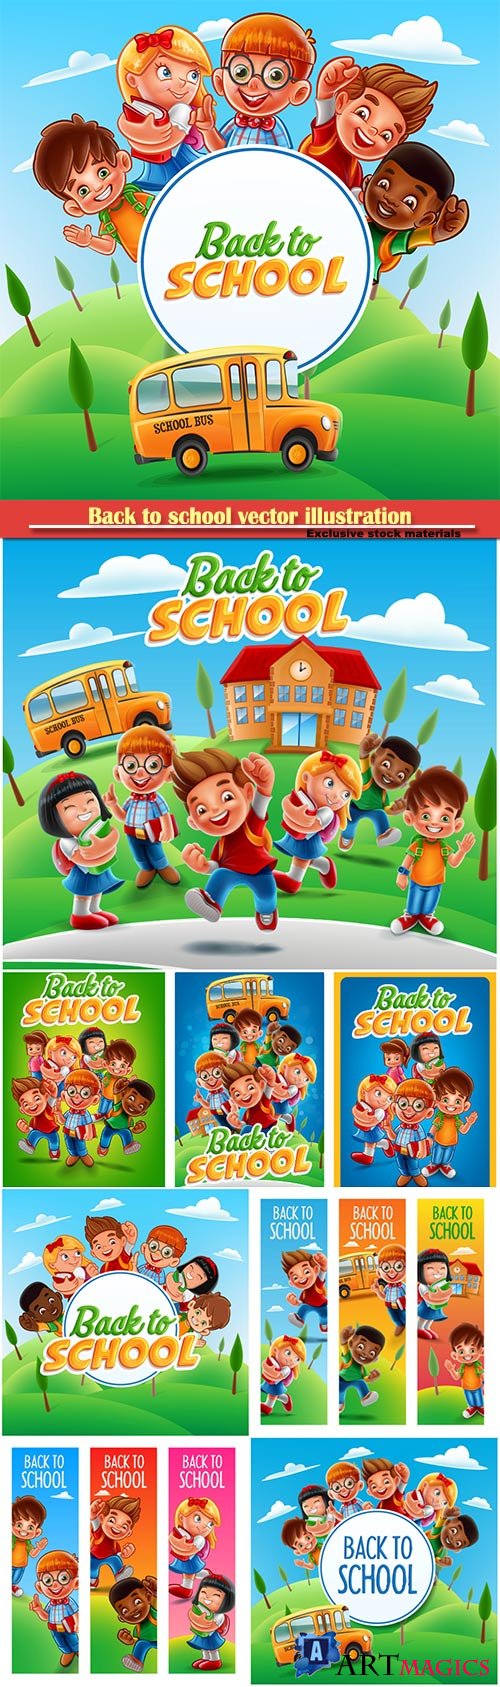 Back to school vector illustration, funny kids with school books